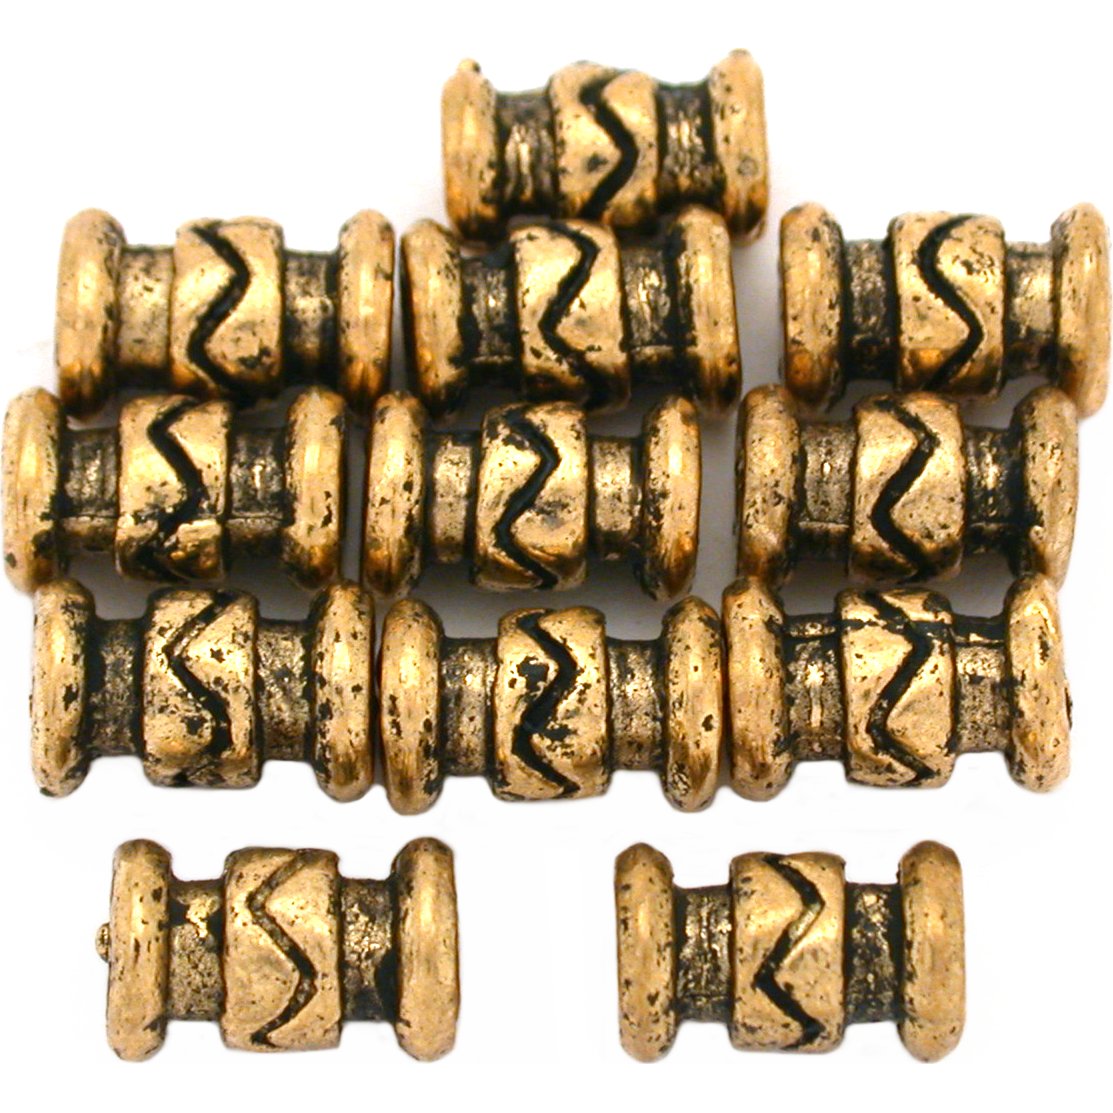 Bali Tube Antique Gold Plated Beads 10mm 15 Grams 10Pcs Approx.